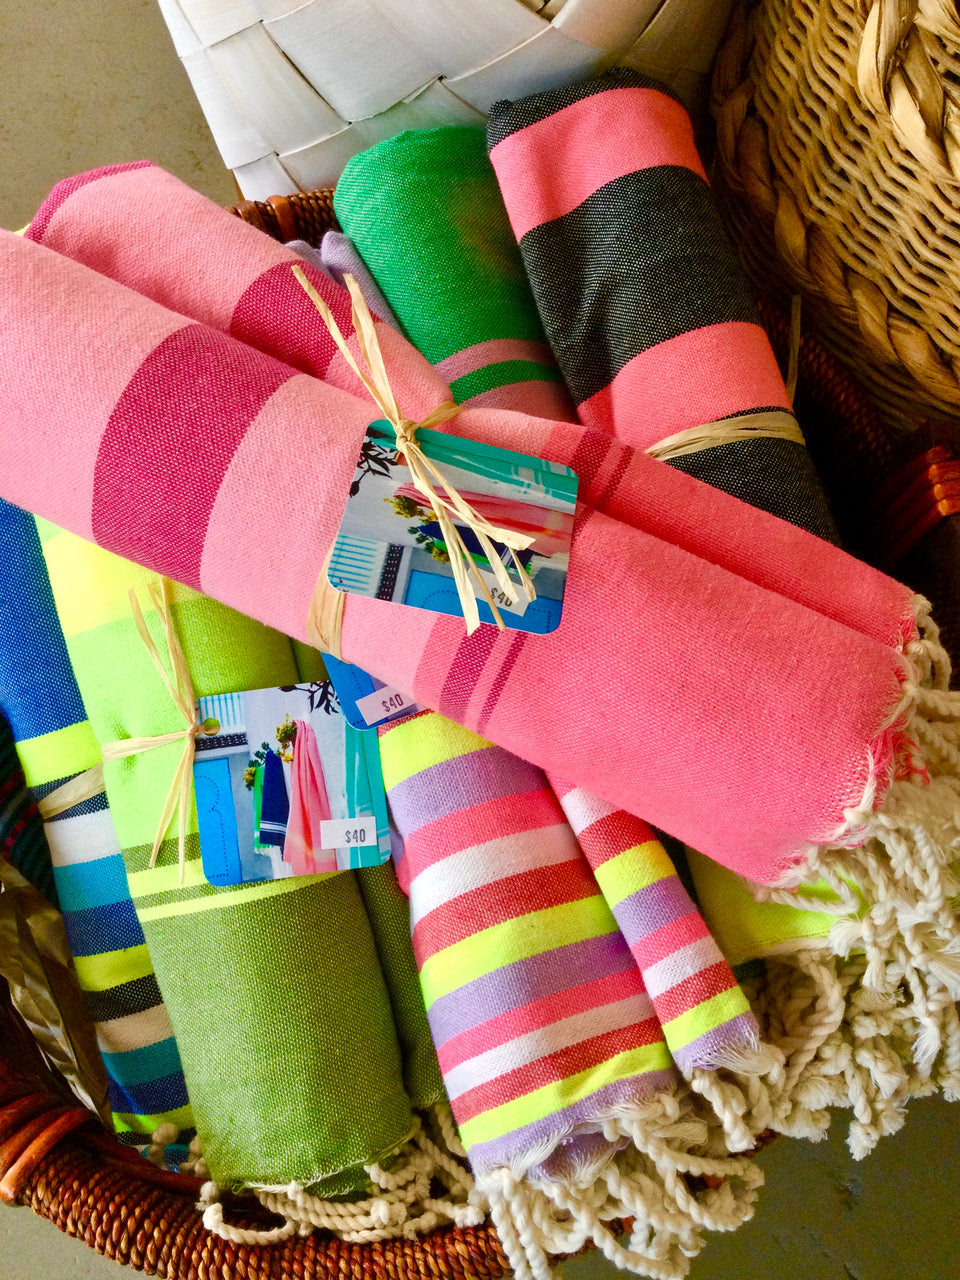 Brightly colored Turkish towels rolled up